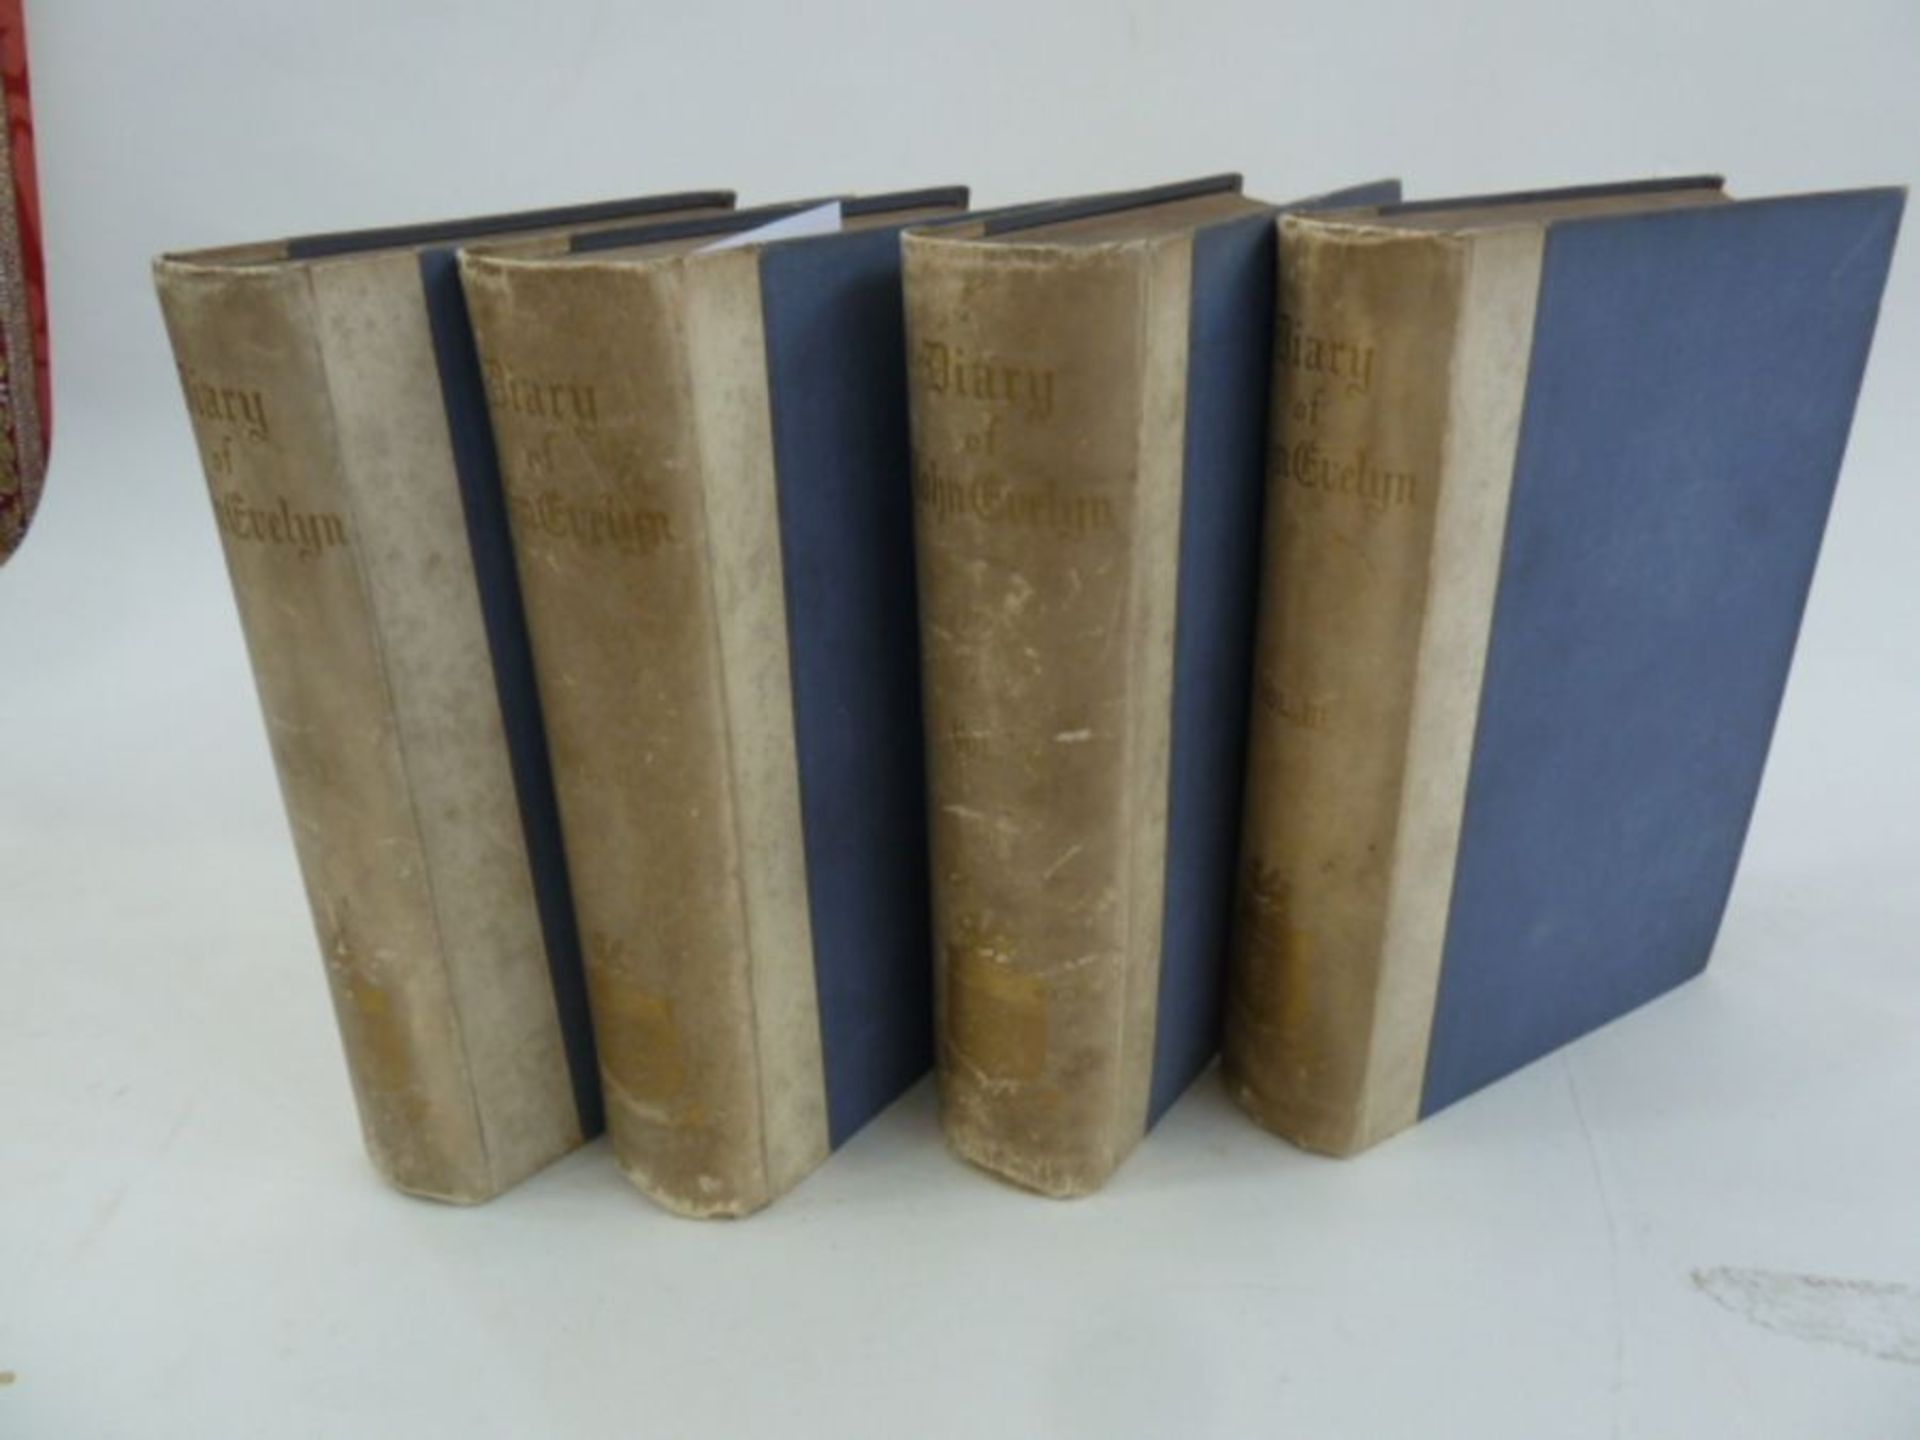 Bray, William and Wheatley, Henry "The Diary of John Evelyn", in 4 vols, Bickers & Son 1879, quarter